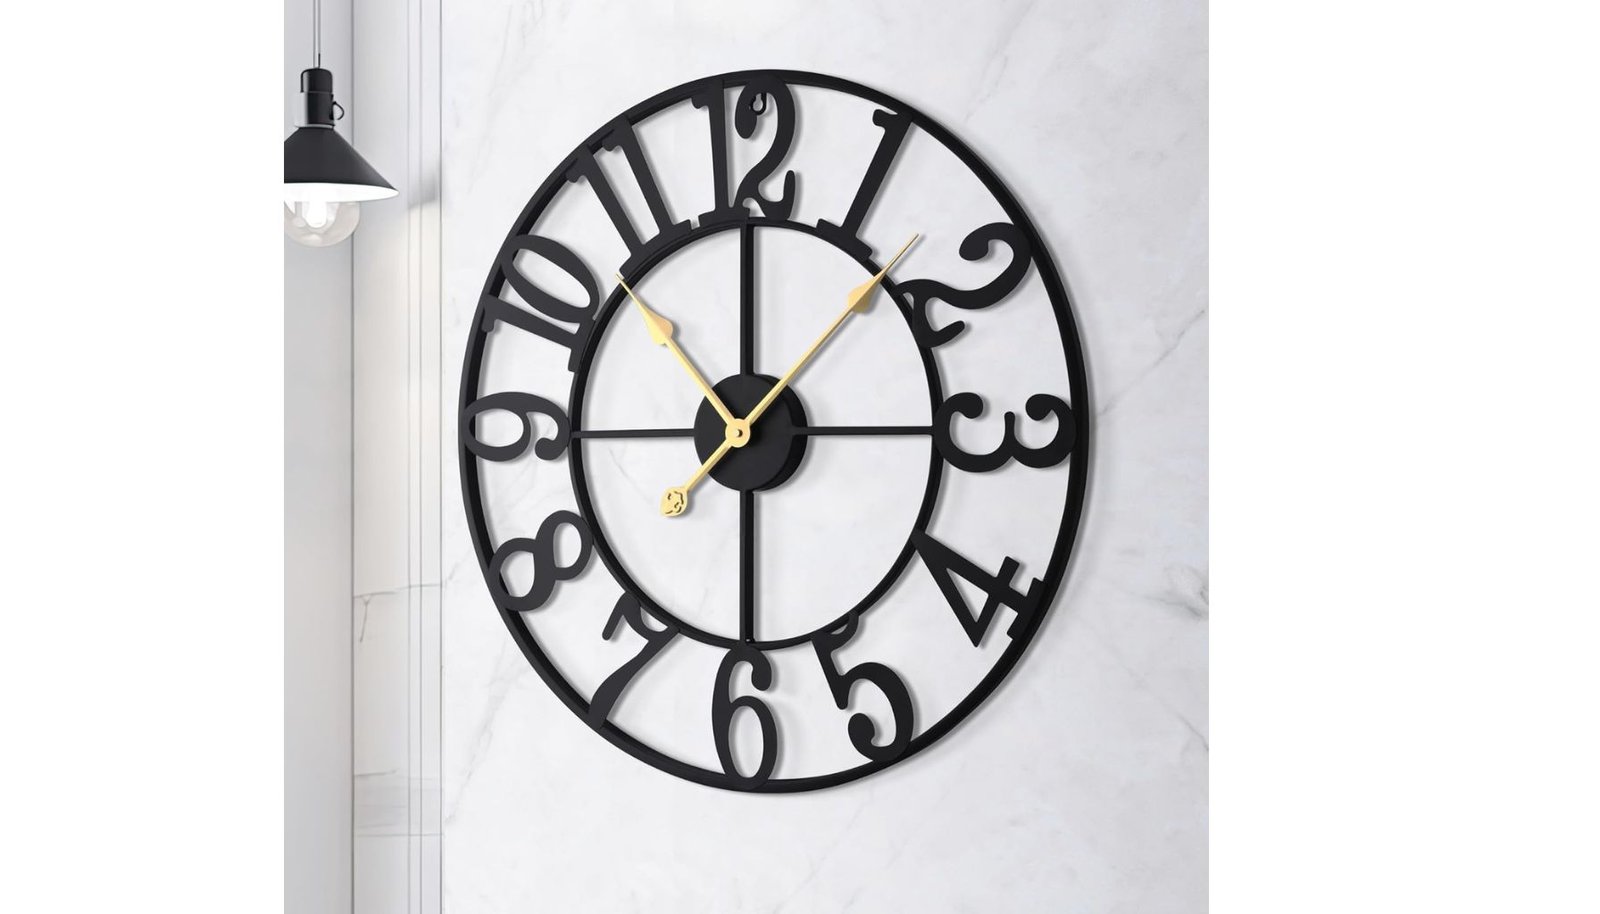 LEIKE 24 Inch Retro Large Wall Clock Review